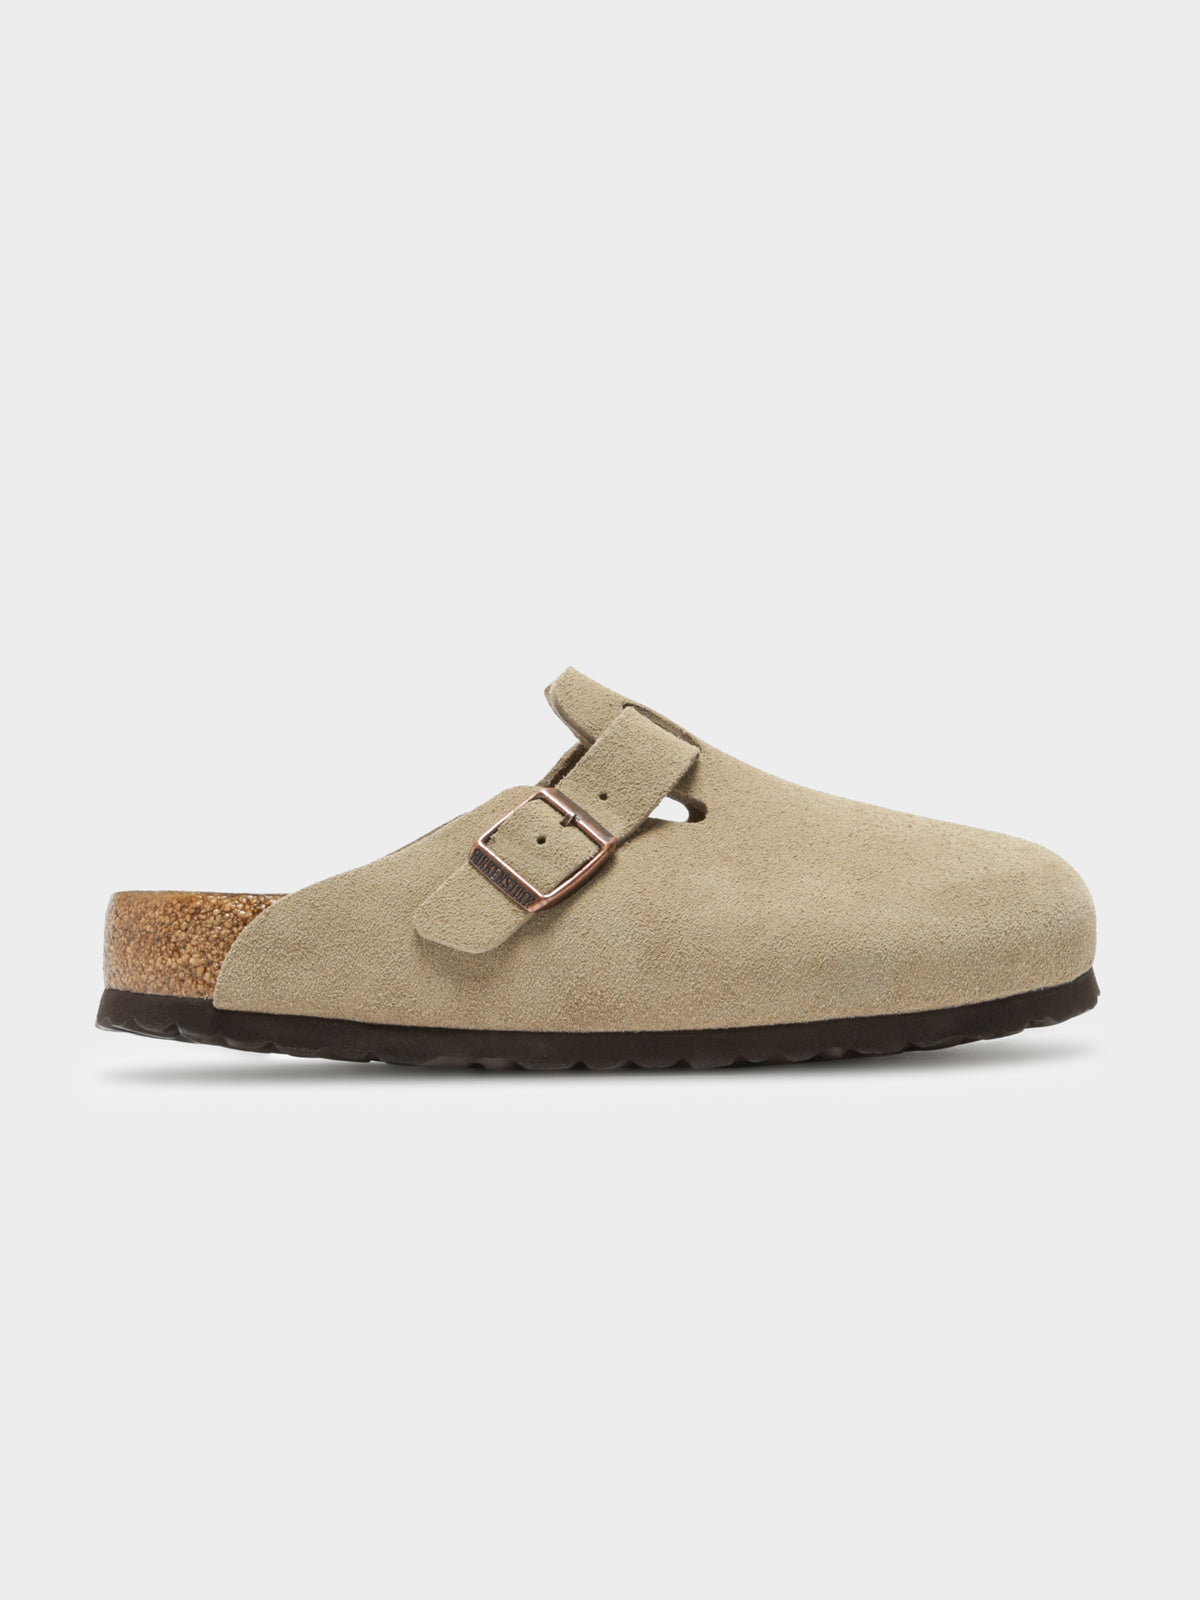 Unisex Boston Soft Footbed Slip-Ons in Taupe Suede Leather